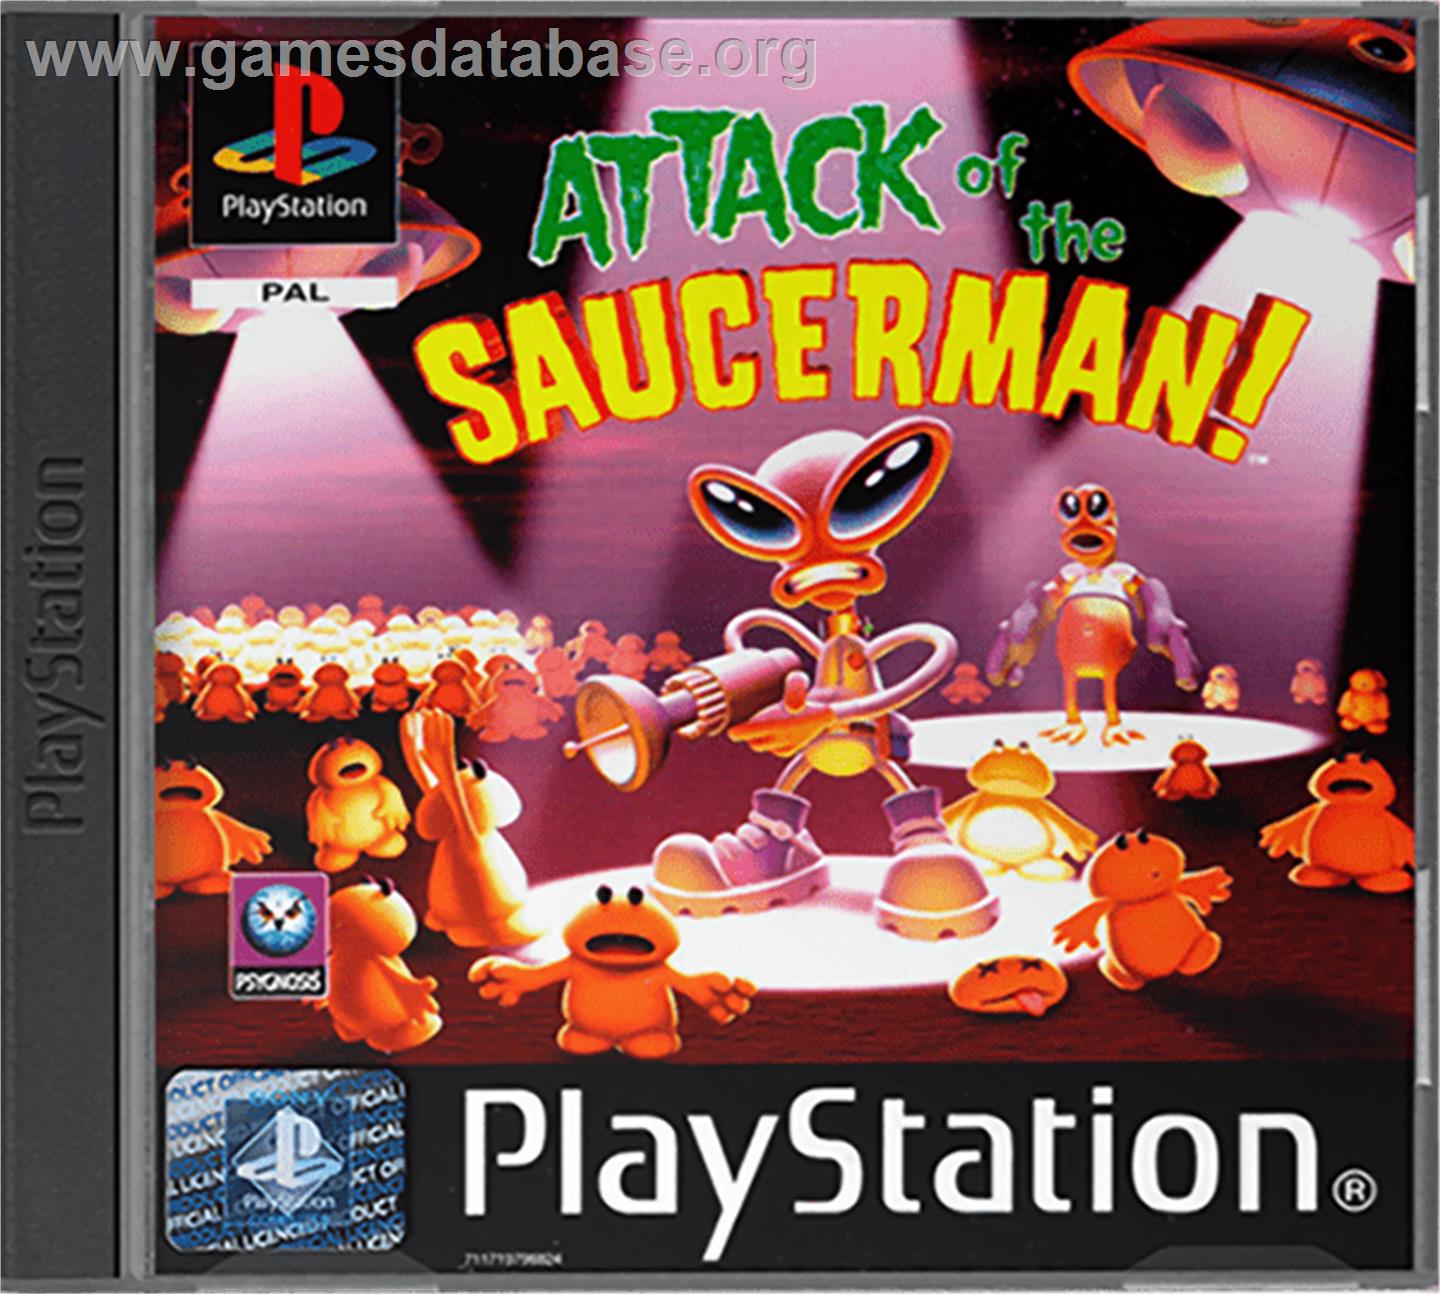 Attack of the Saucerman - Sony Playstation - Artwork - Box